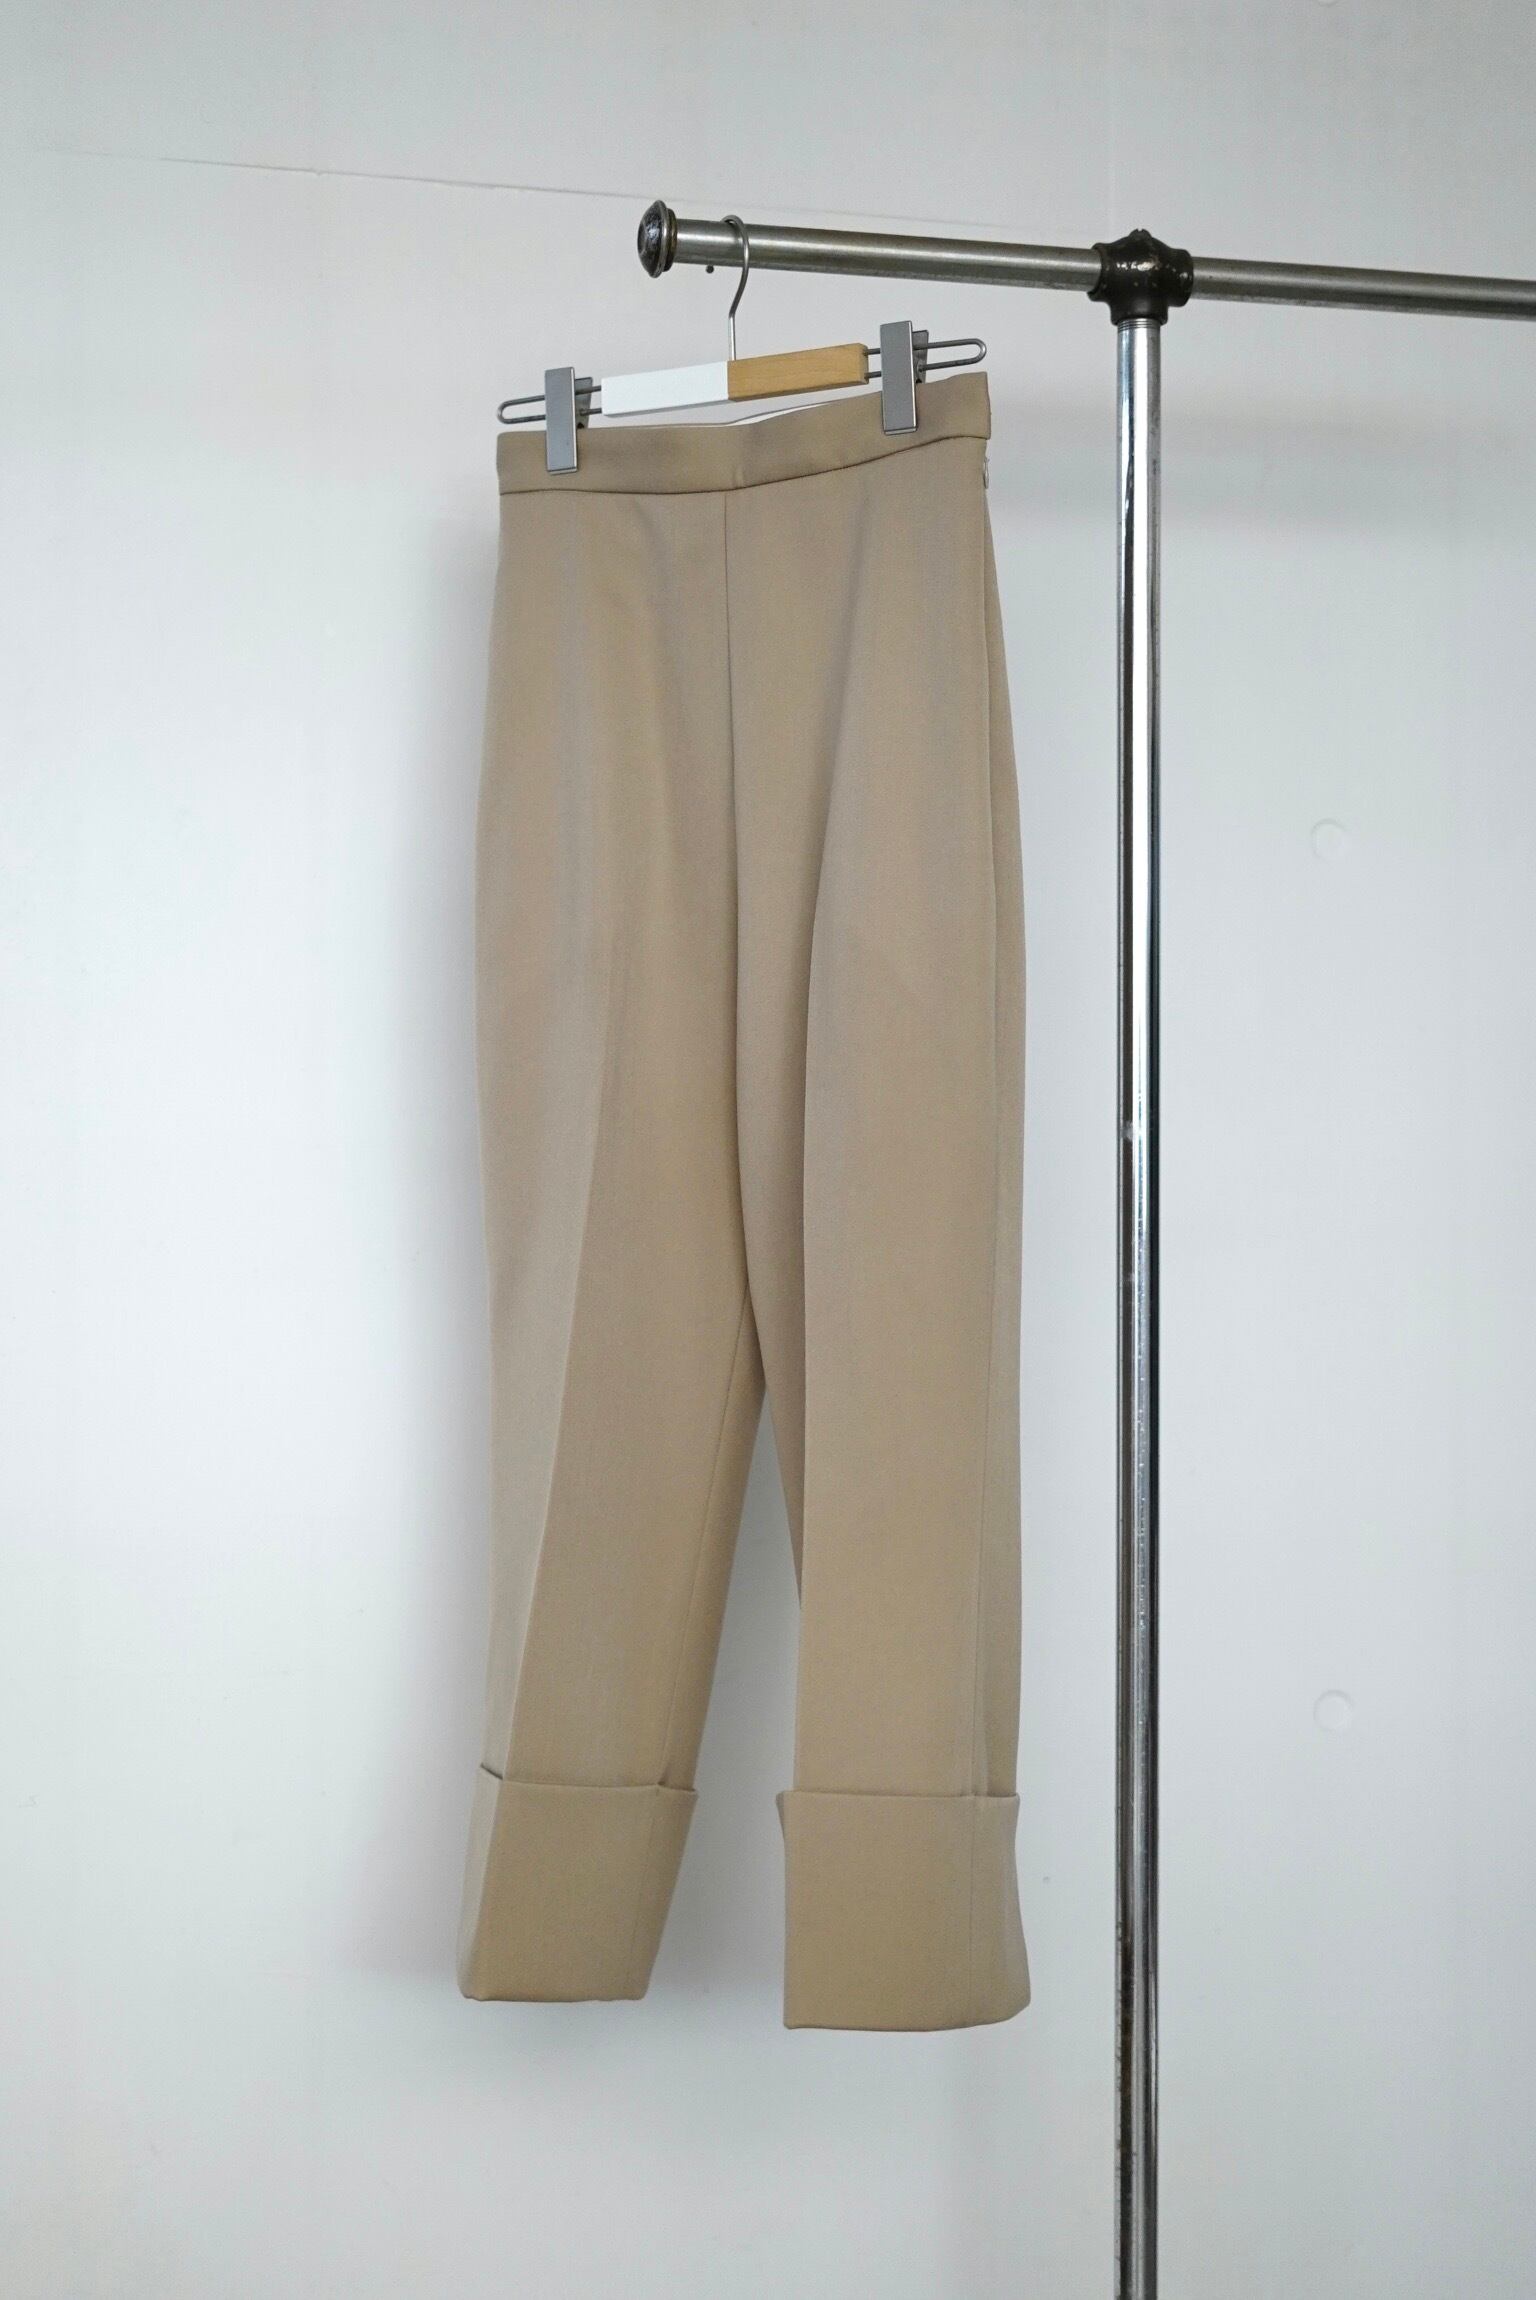 Double cloth Cropped pants iirot 【残りわずか】 51.0%OFF zicosur.co